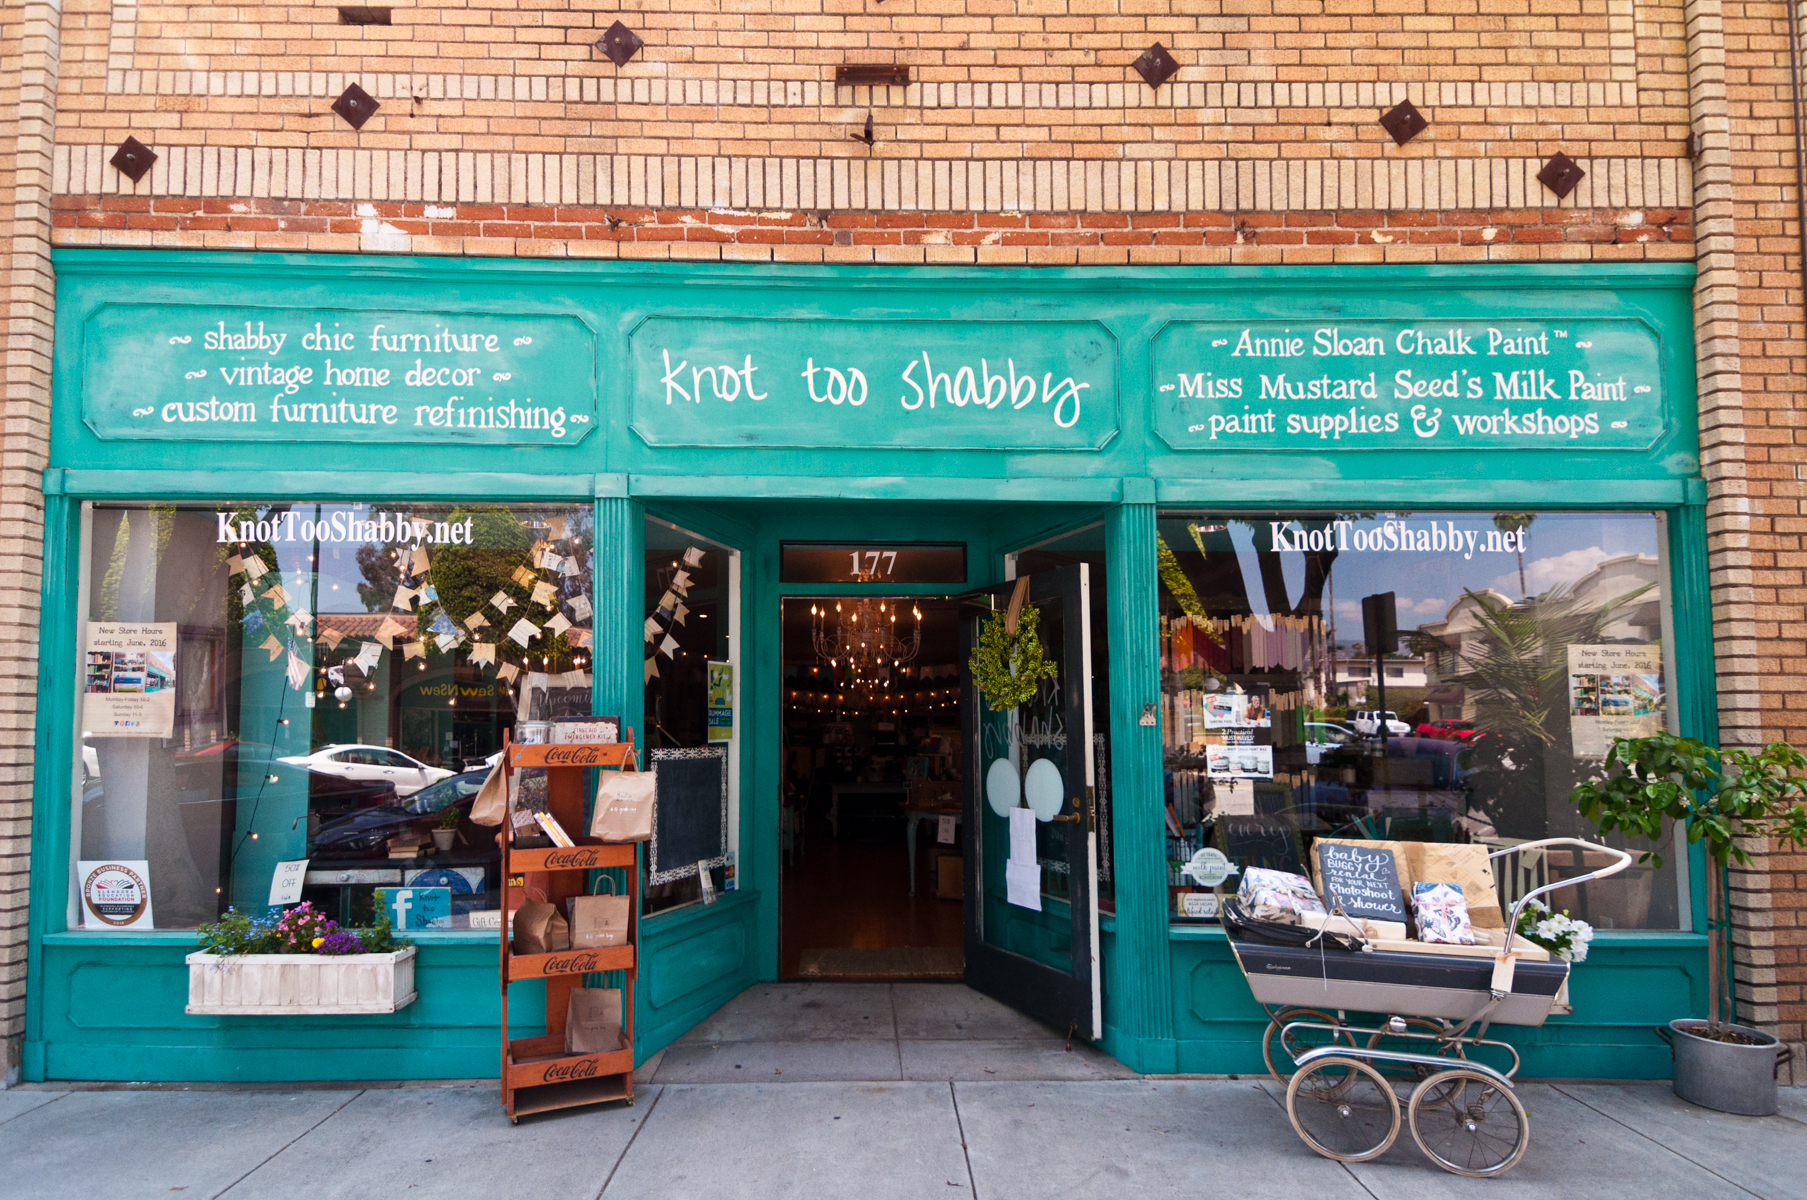 Business Ramblings and Before and After: #knottooshabbyGLENDORA’s Workshop Renovation